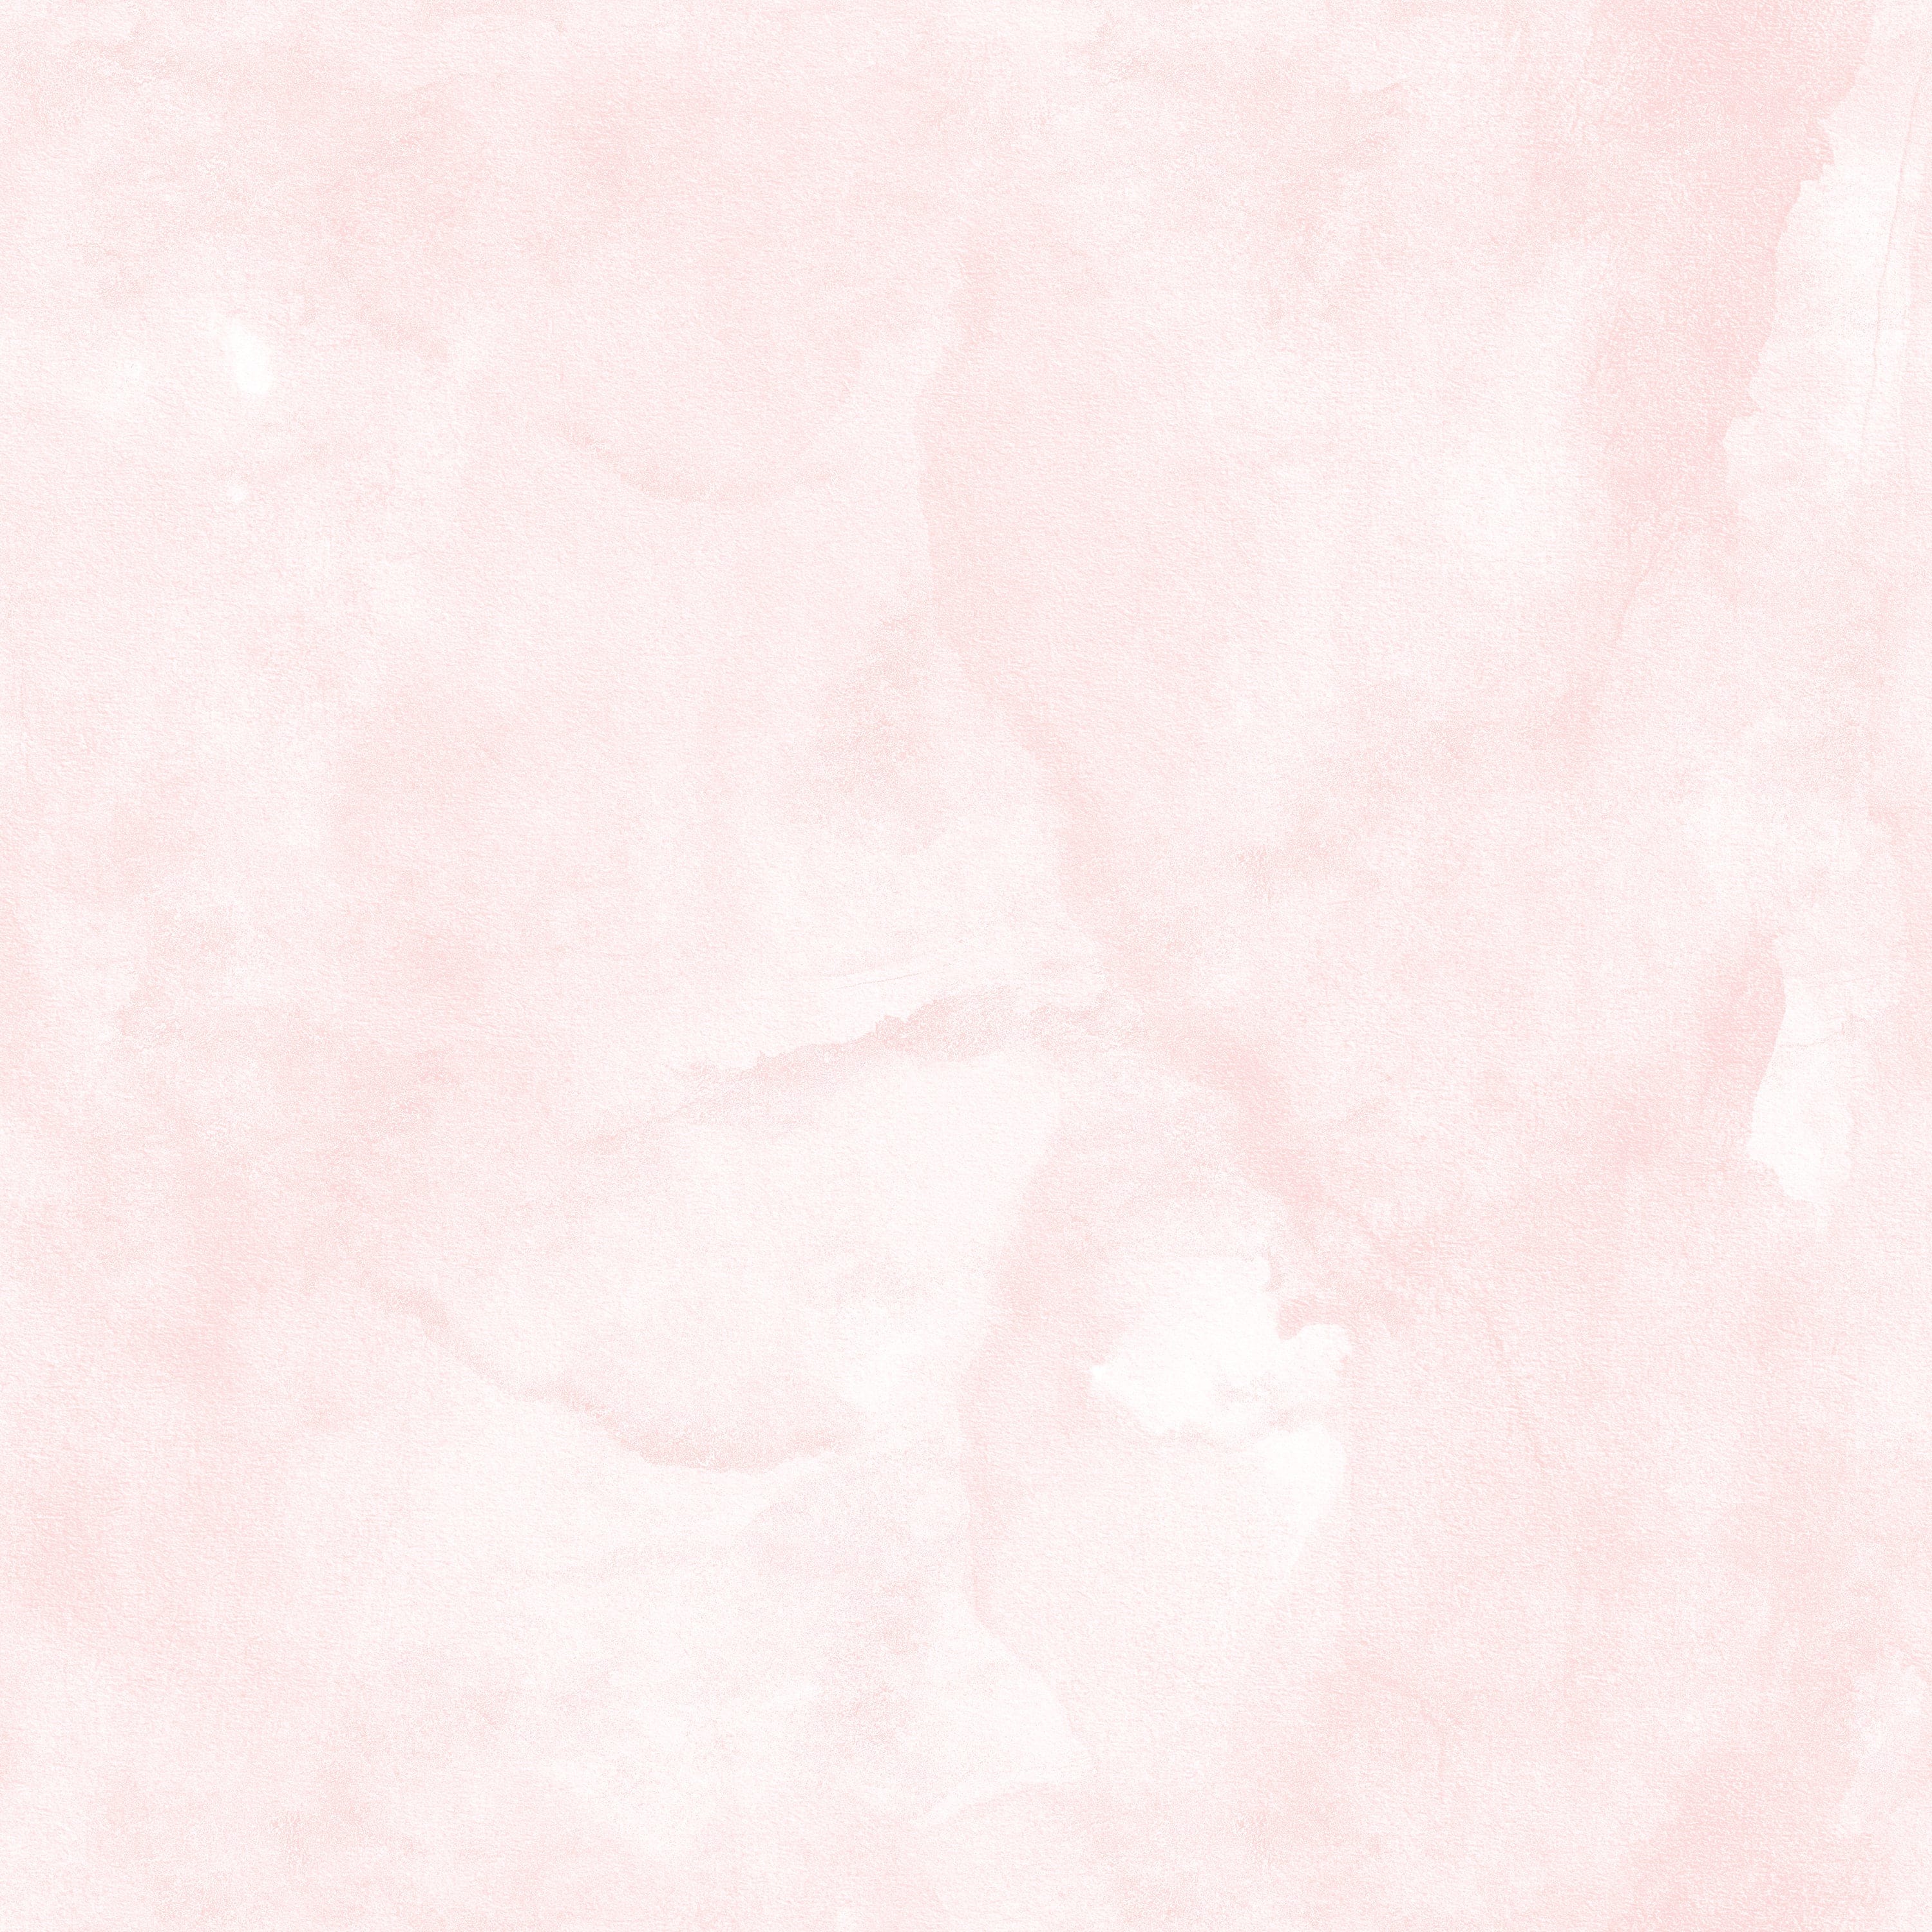 Close-up view of Kids Lime Wash Wallpaper in Blush Pink displaying its soft, watercolor texture that creates a gentle and calming ambiance suitable for children's rooms